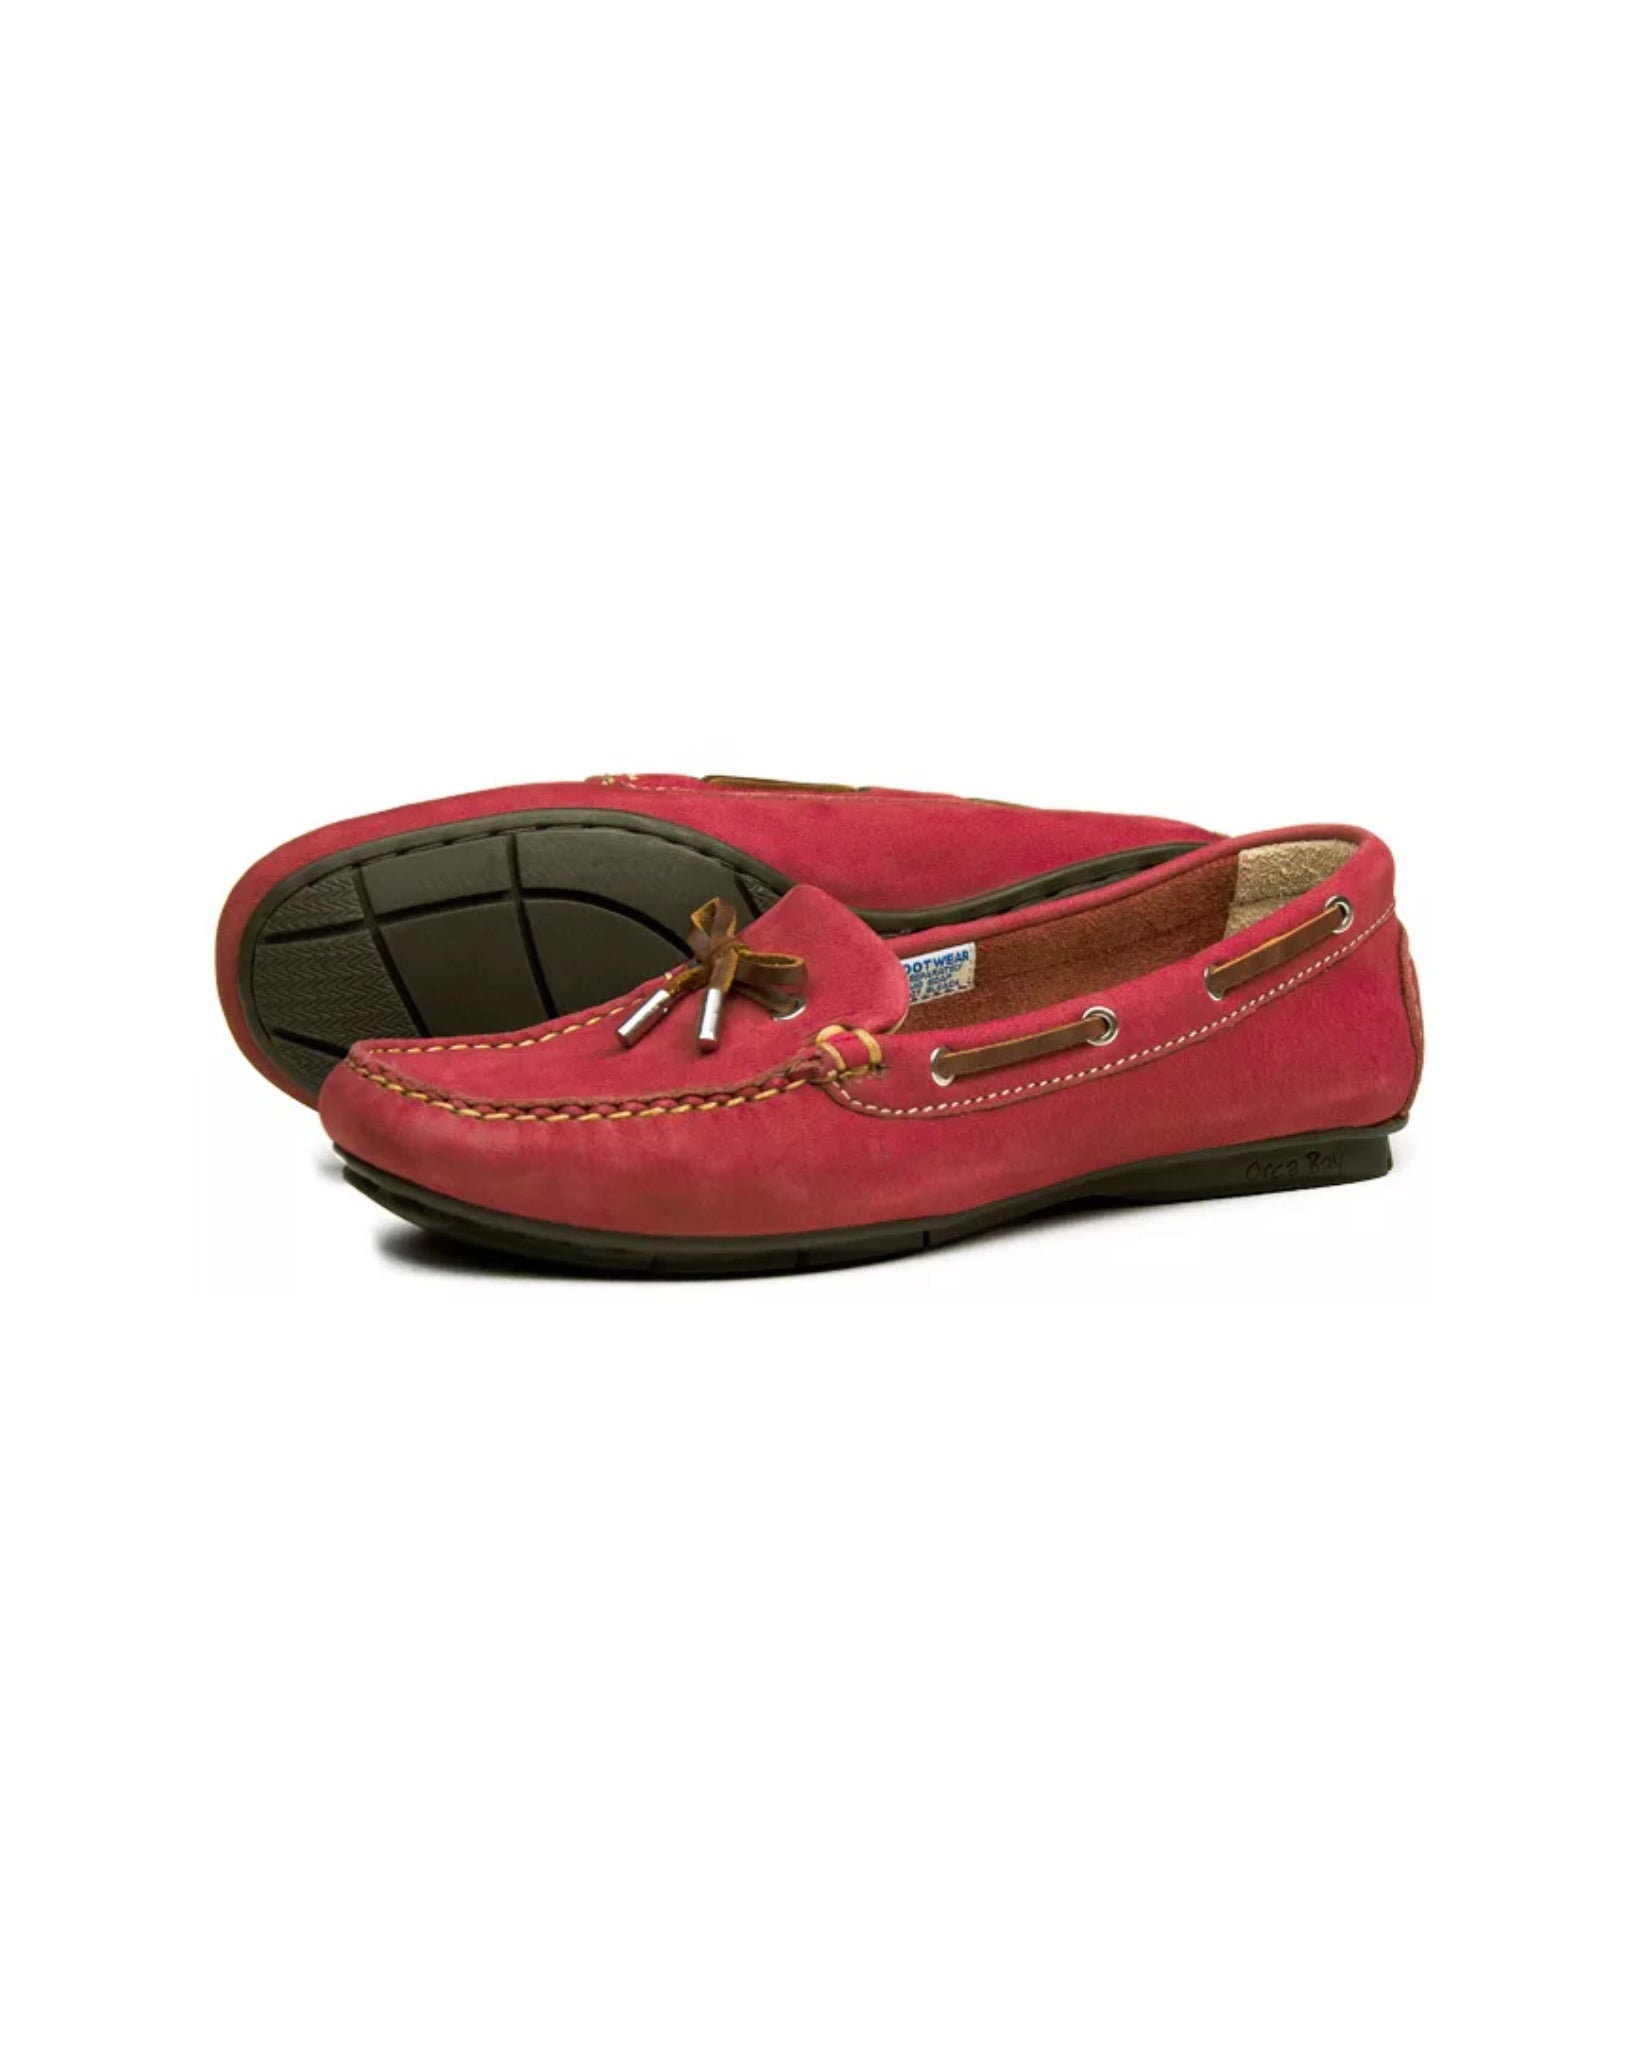 Ballena Loafers - Berry